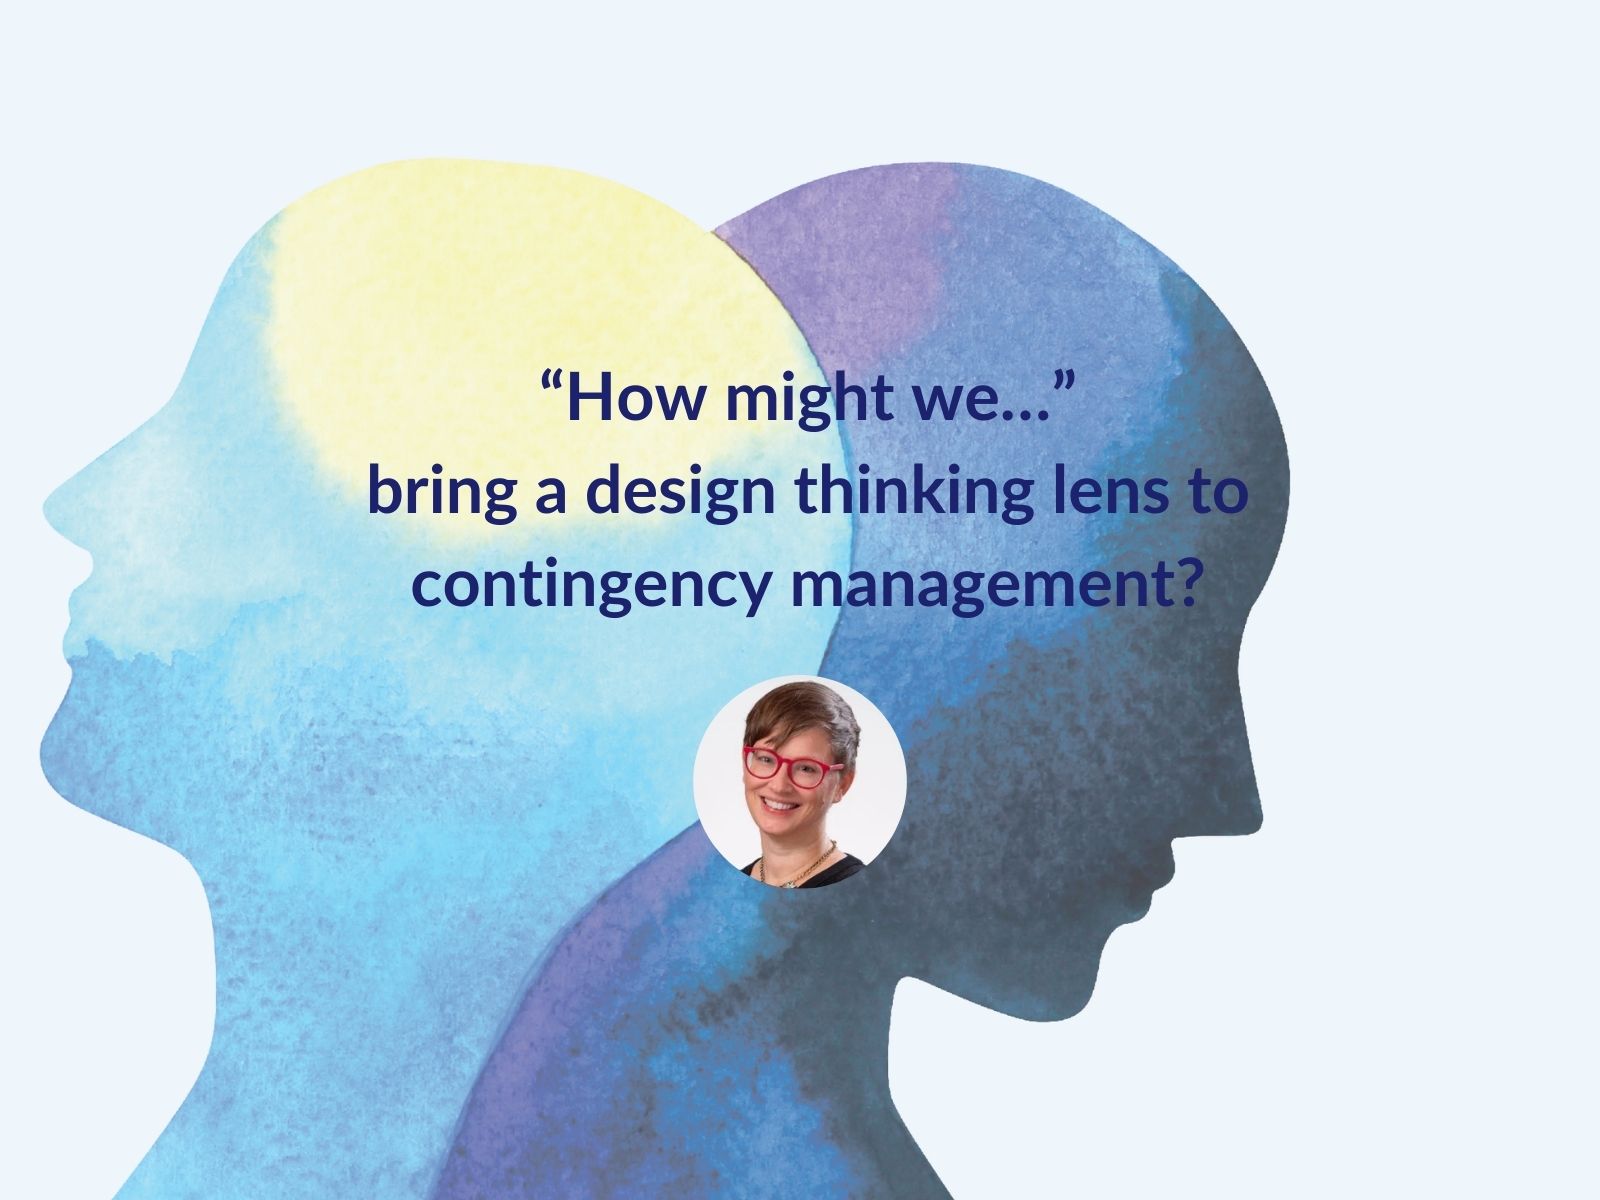 Title of the keynote is "How might we…" bring a design thinking lens to contingency management?